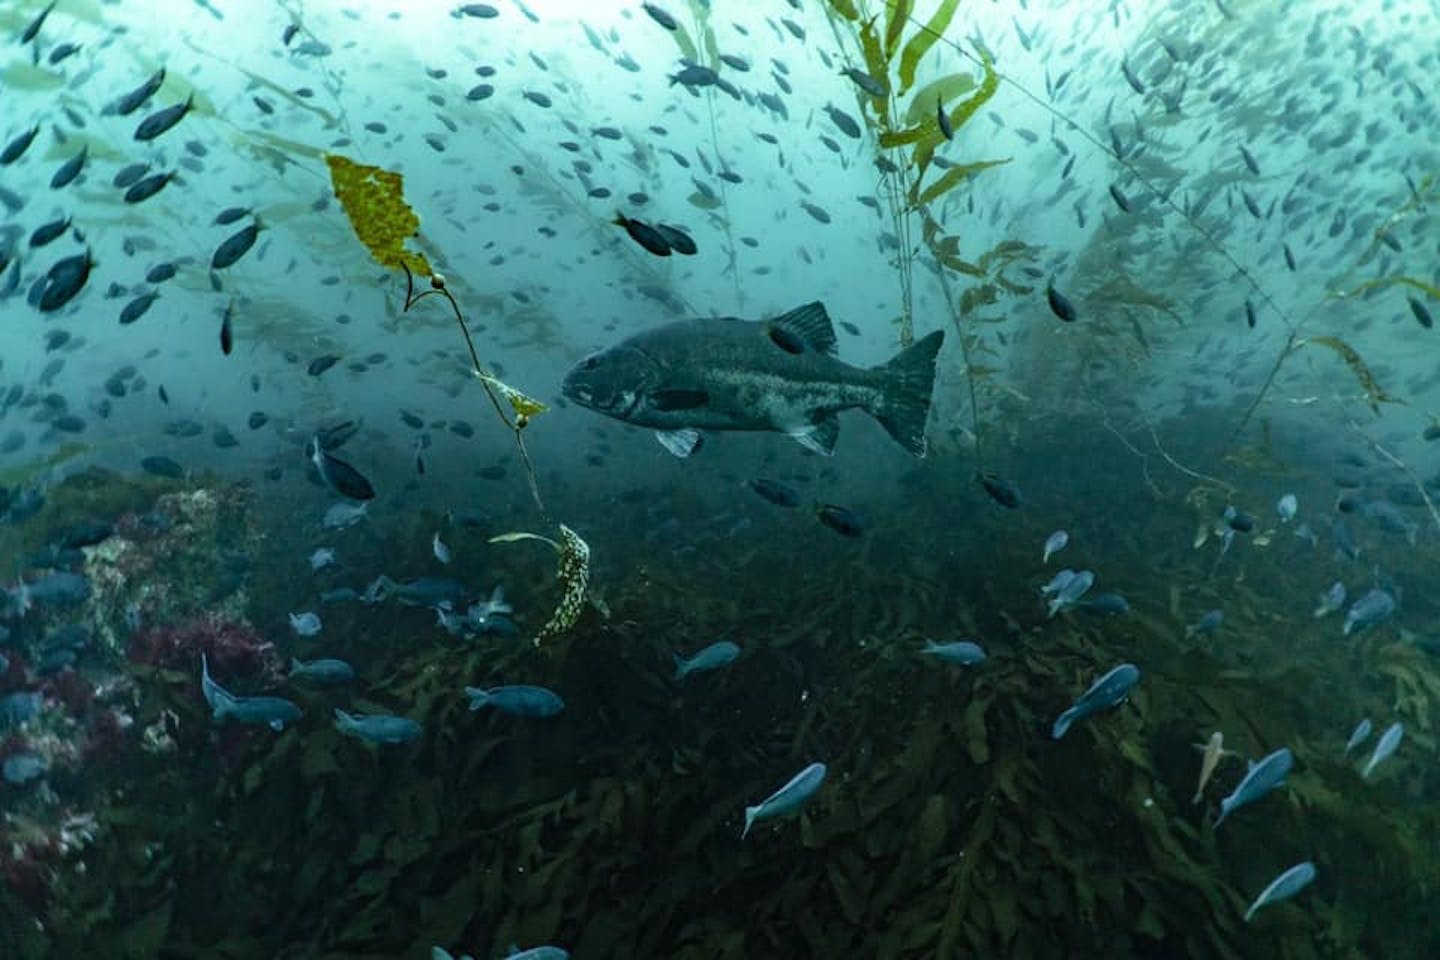 Big dark fish swimming in kelp forest surrounded by smaller fish.